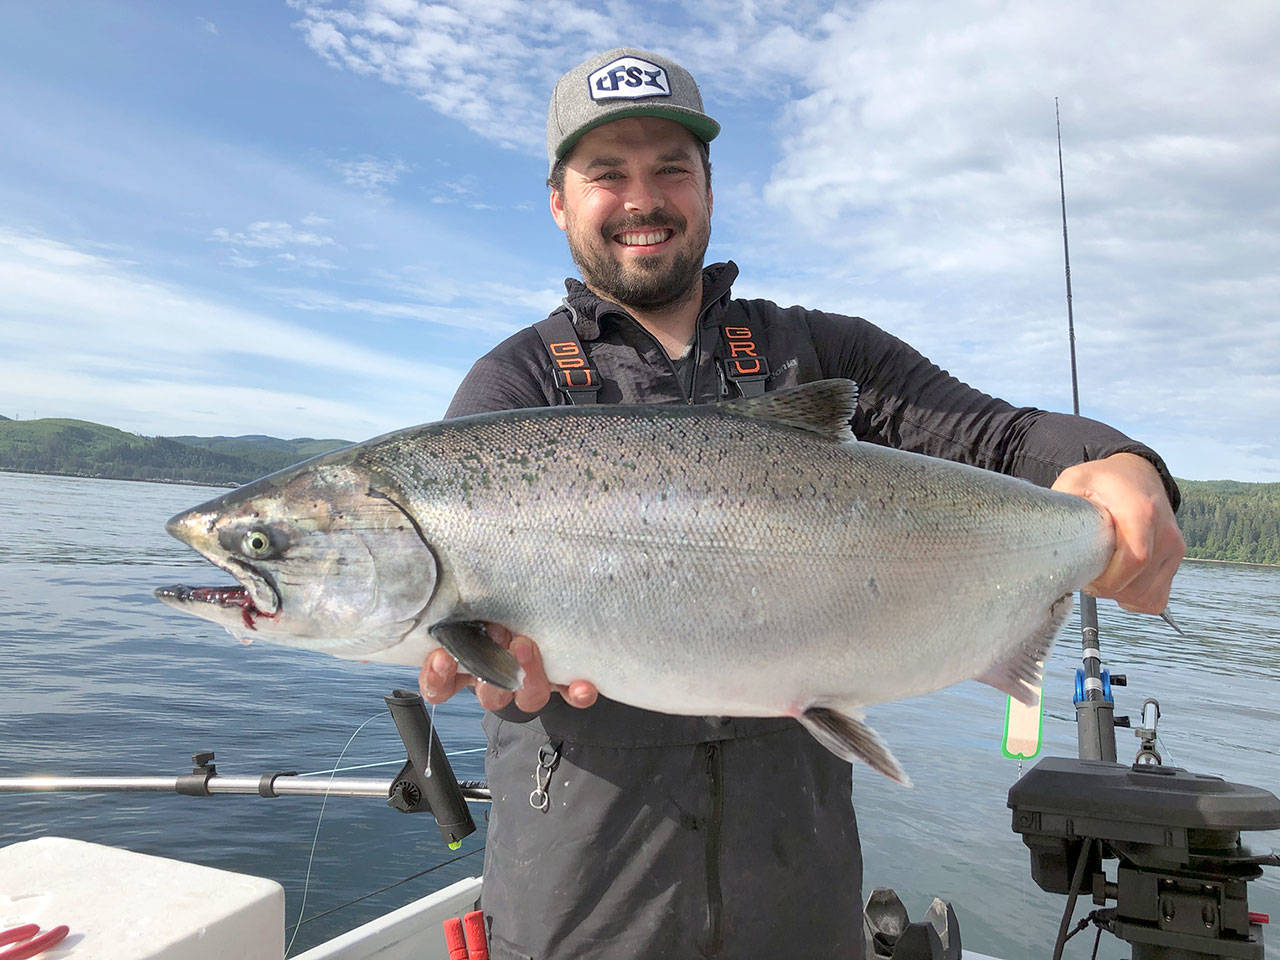 Bellingham angler Tyler Dockins landed this chinook believed to weigh in the upper teens while fishing near Mushroom Rock off Neah Bay with his father Ron Miller and father’s cousin Marty Gray on Tuesday. The trio landed their one-fish king limit all four days they fished in Miller’s boat, The Witchy Woman, including limiting by 6:50 a.m. Wednesday. (Photo courtesy of Marty Gray)